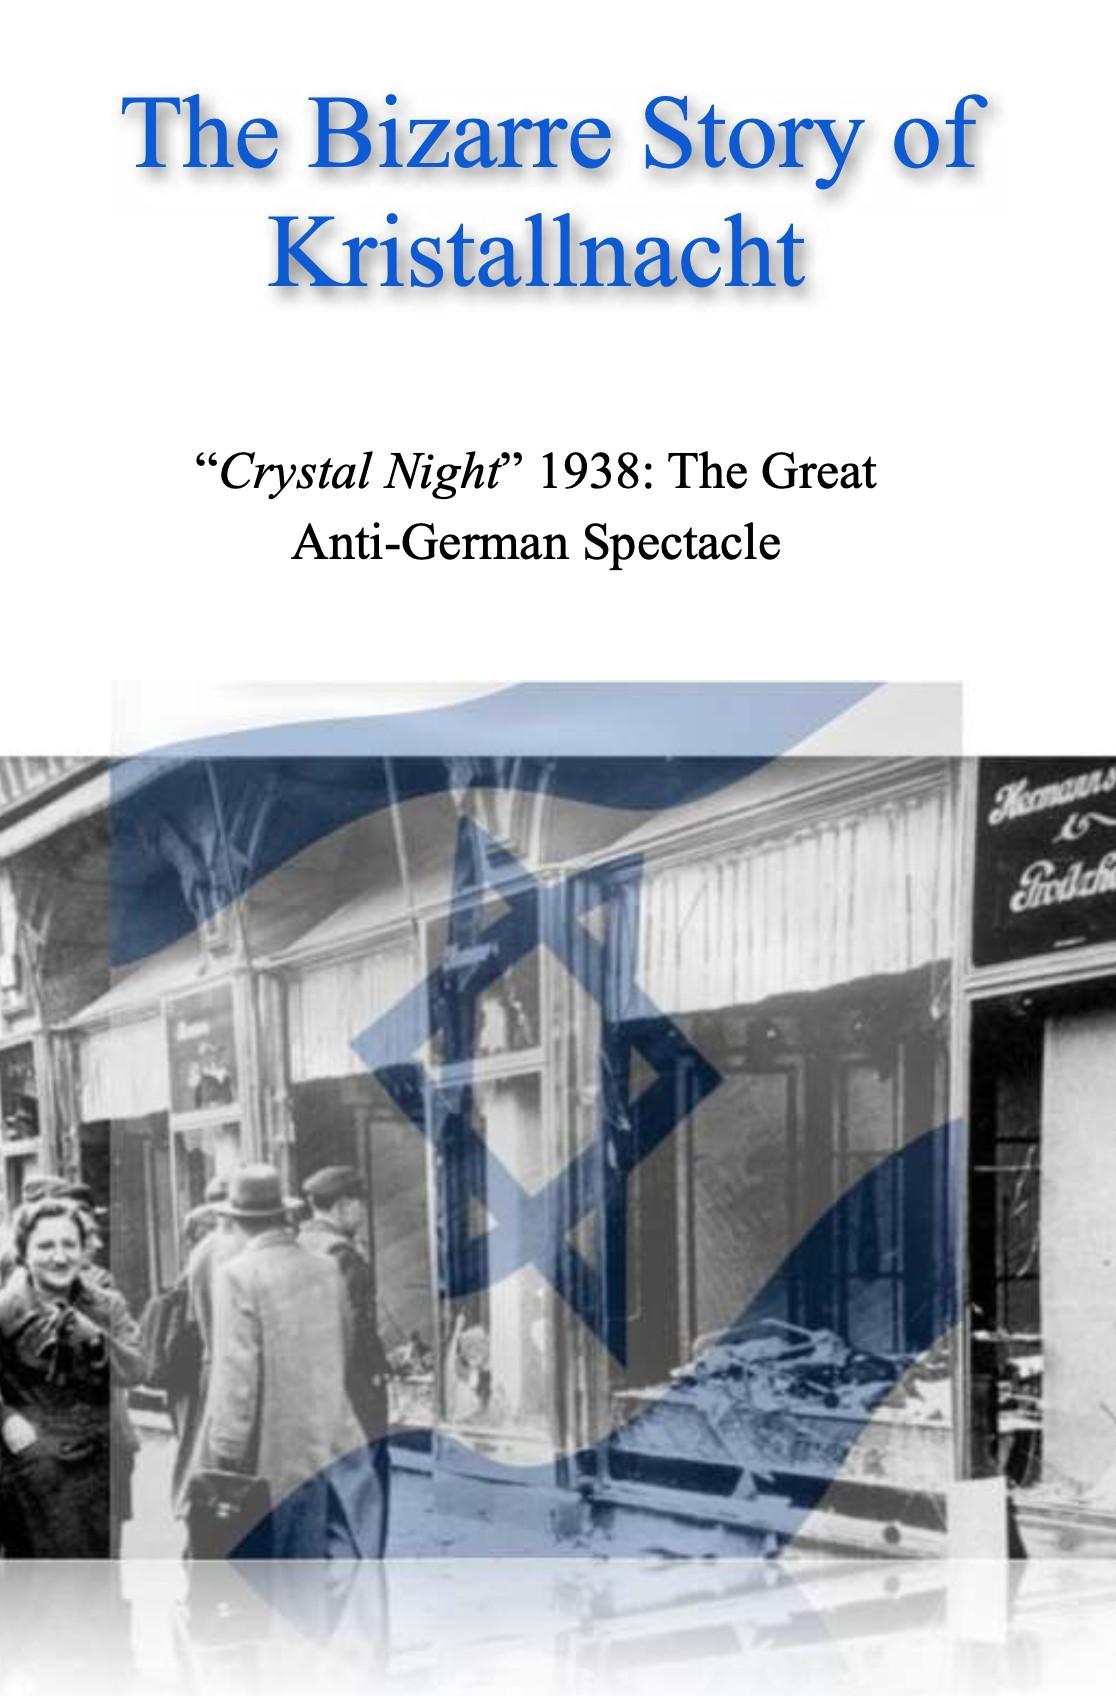 The Bizarre Story of Kristallnacht - The Great Anti-German Spectacle (1991) by Ingrid Weckert